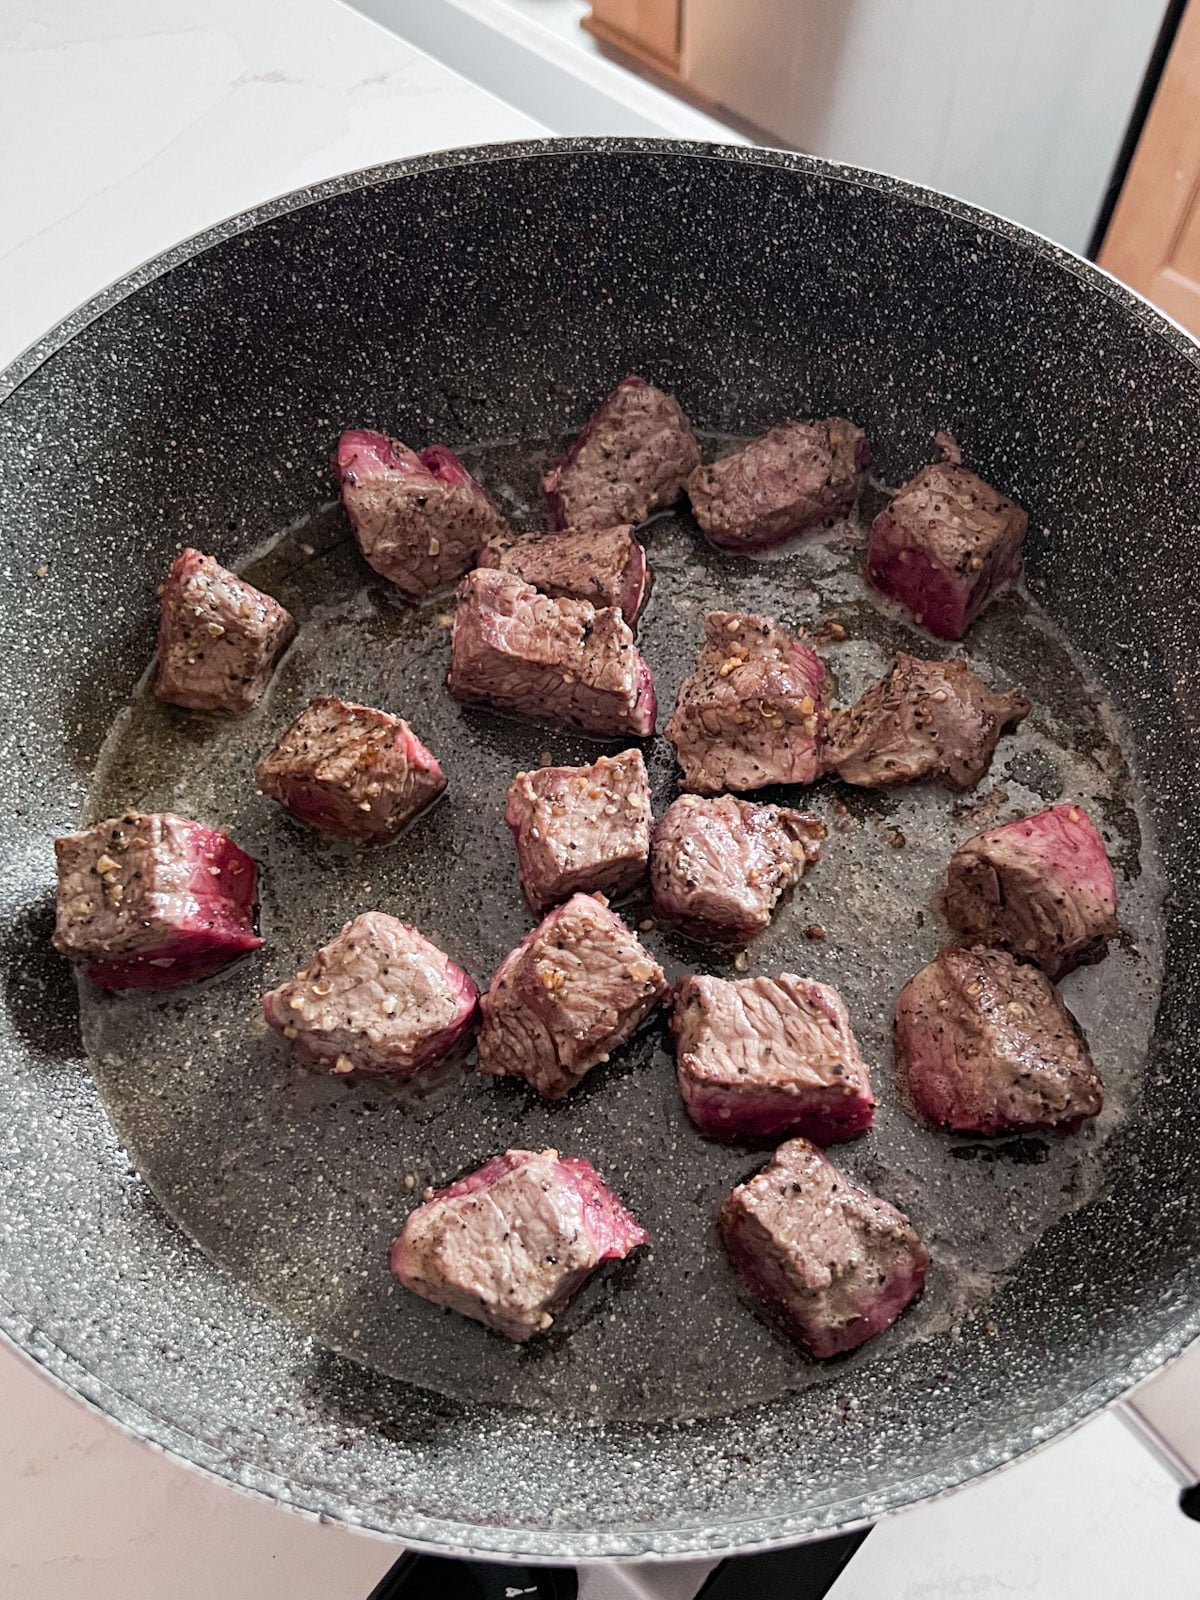 Partially cooked beef chunks cooking in a skillet.